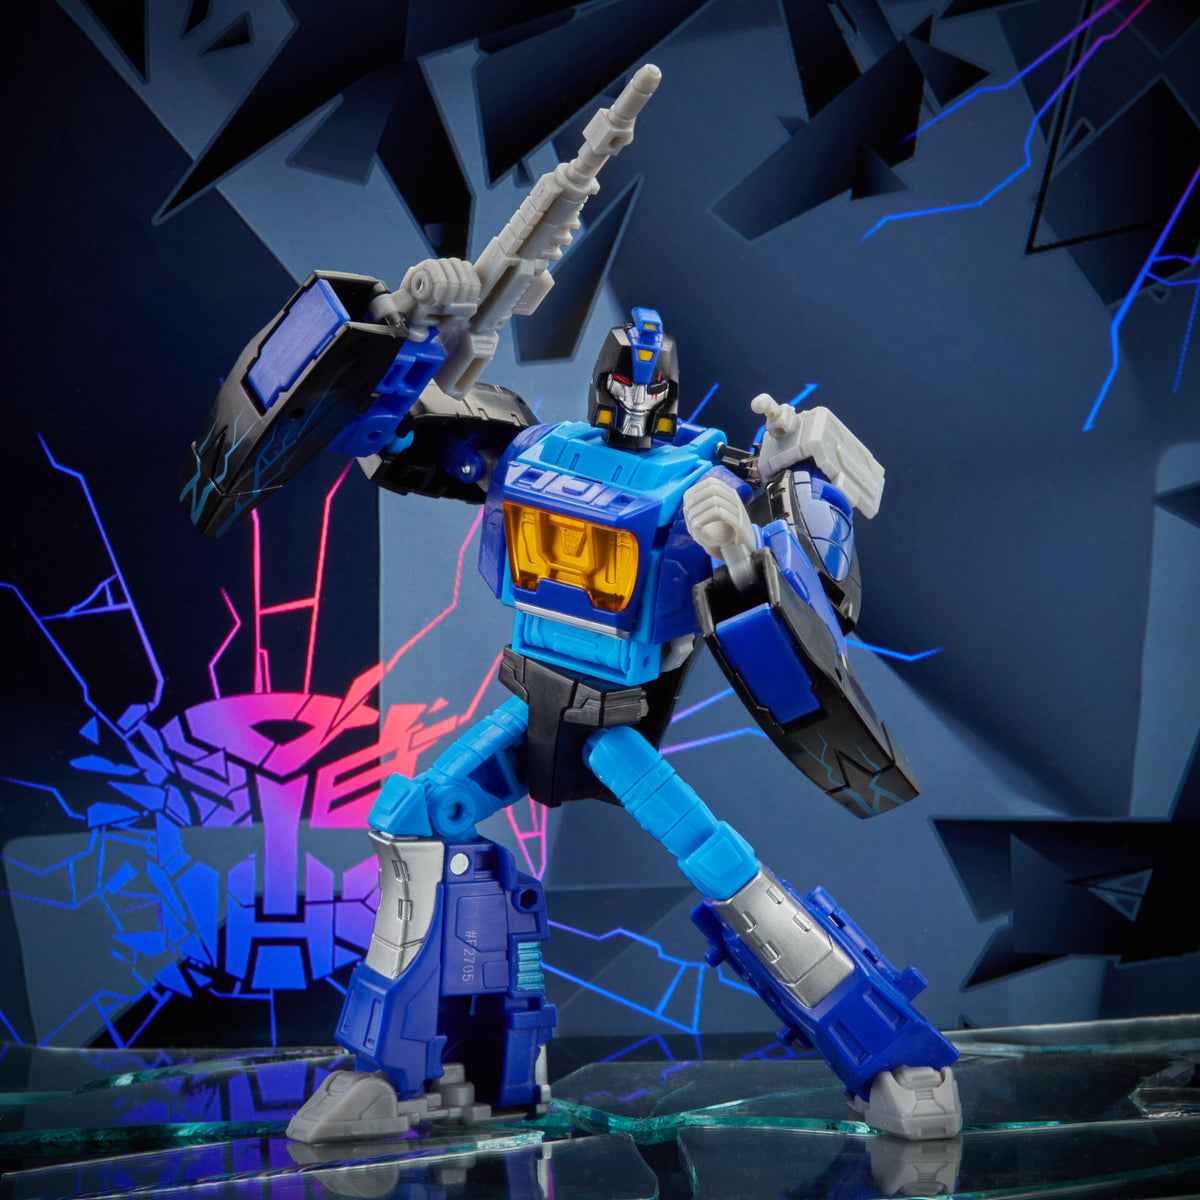 Transformers Generations Shattered Glass Collection Blurr & IDW's